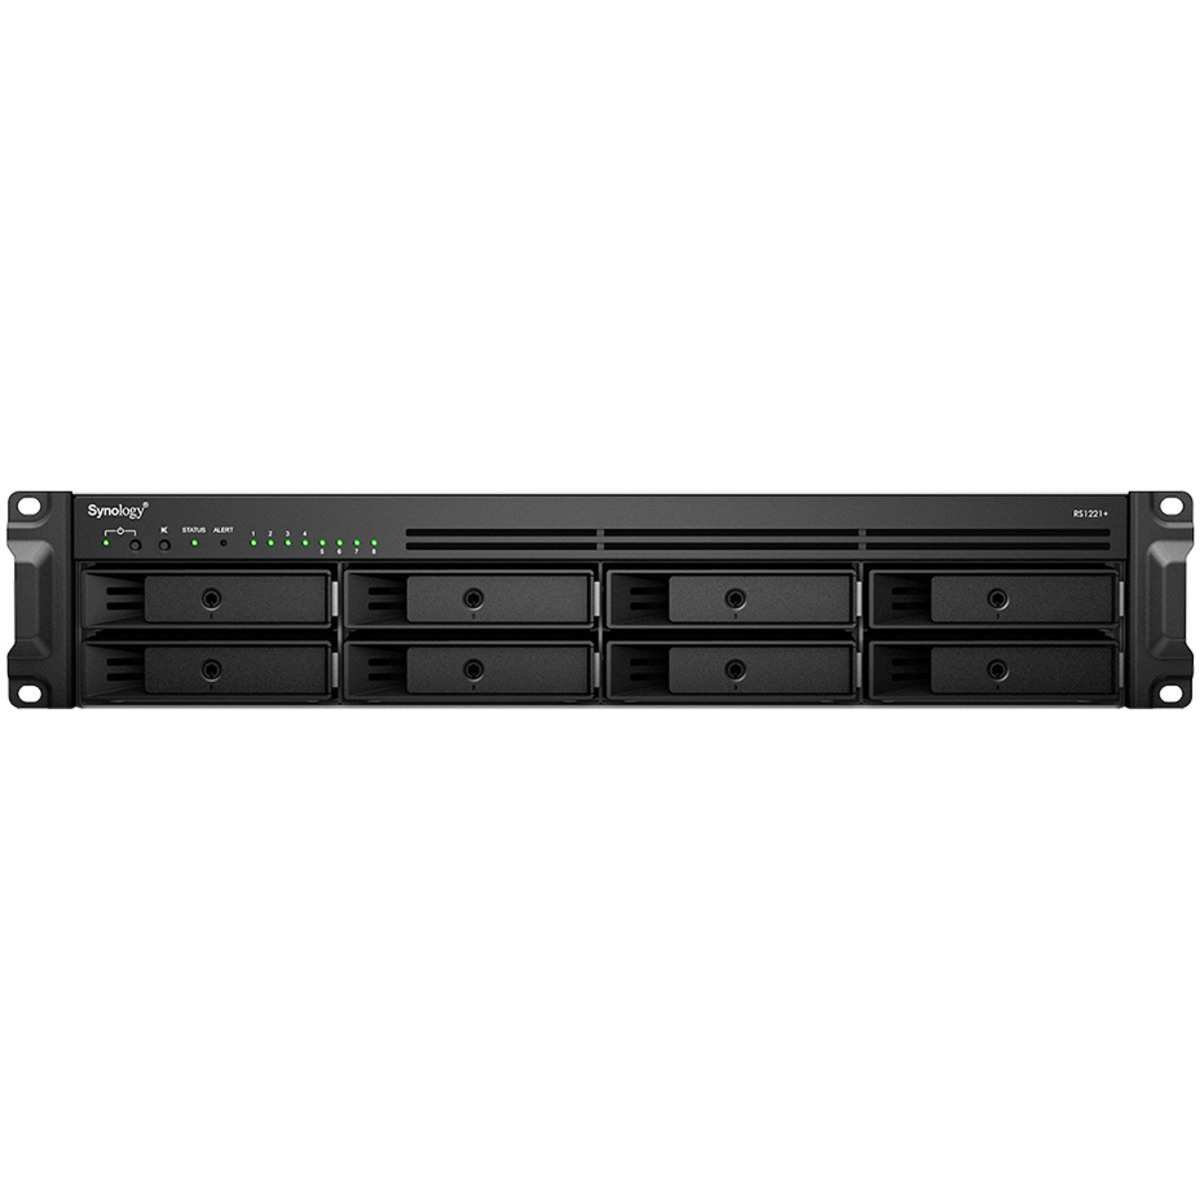 buy $3984 Synology RackStation RS1221RP+ 64tb RackMount NAS - Network Attached Storage Device 8x8000gb Toshiba Enterprise Capacity MG08ADA800E 3.5 7200rpm SATA 6Gb/s HDD ENTERPRISE Class Drives Installed - Burn-In Tested - ON SALE - nas headquarters buy network attached storage server device das new raid-5 free shipping usa christmas new year holiday sale RackStation RS1221RP+